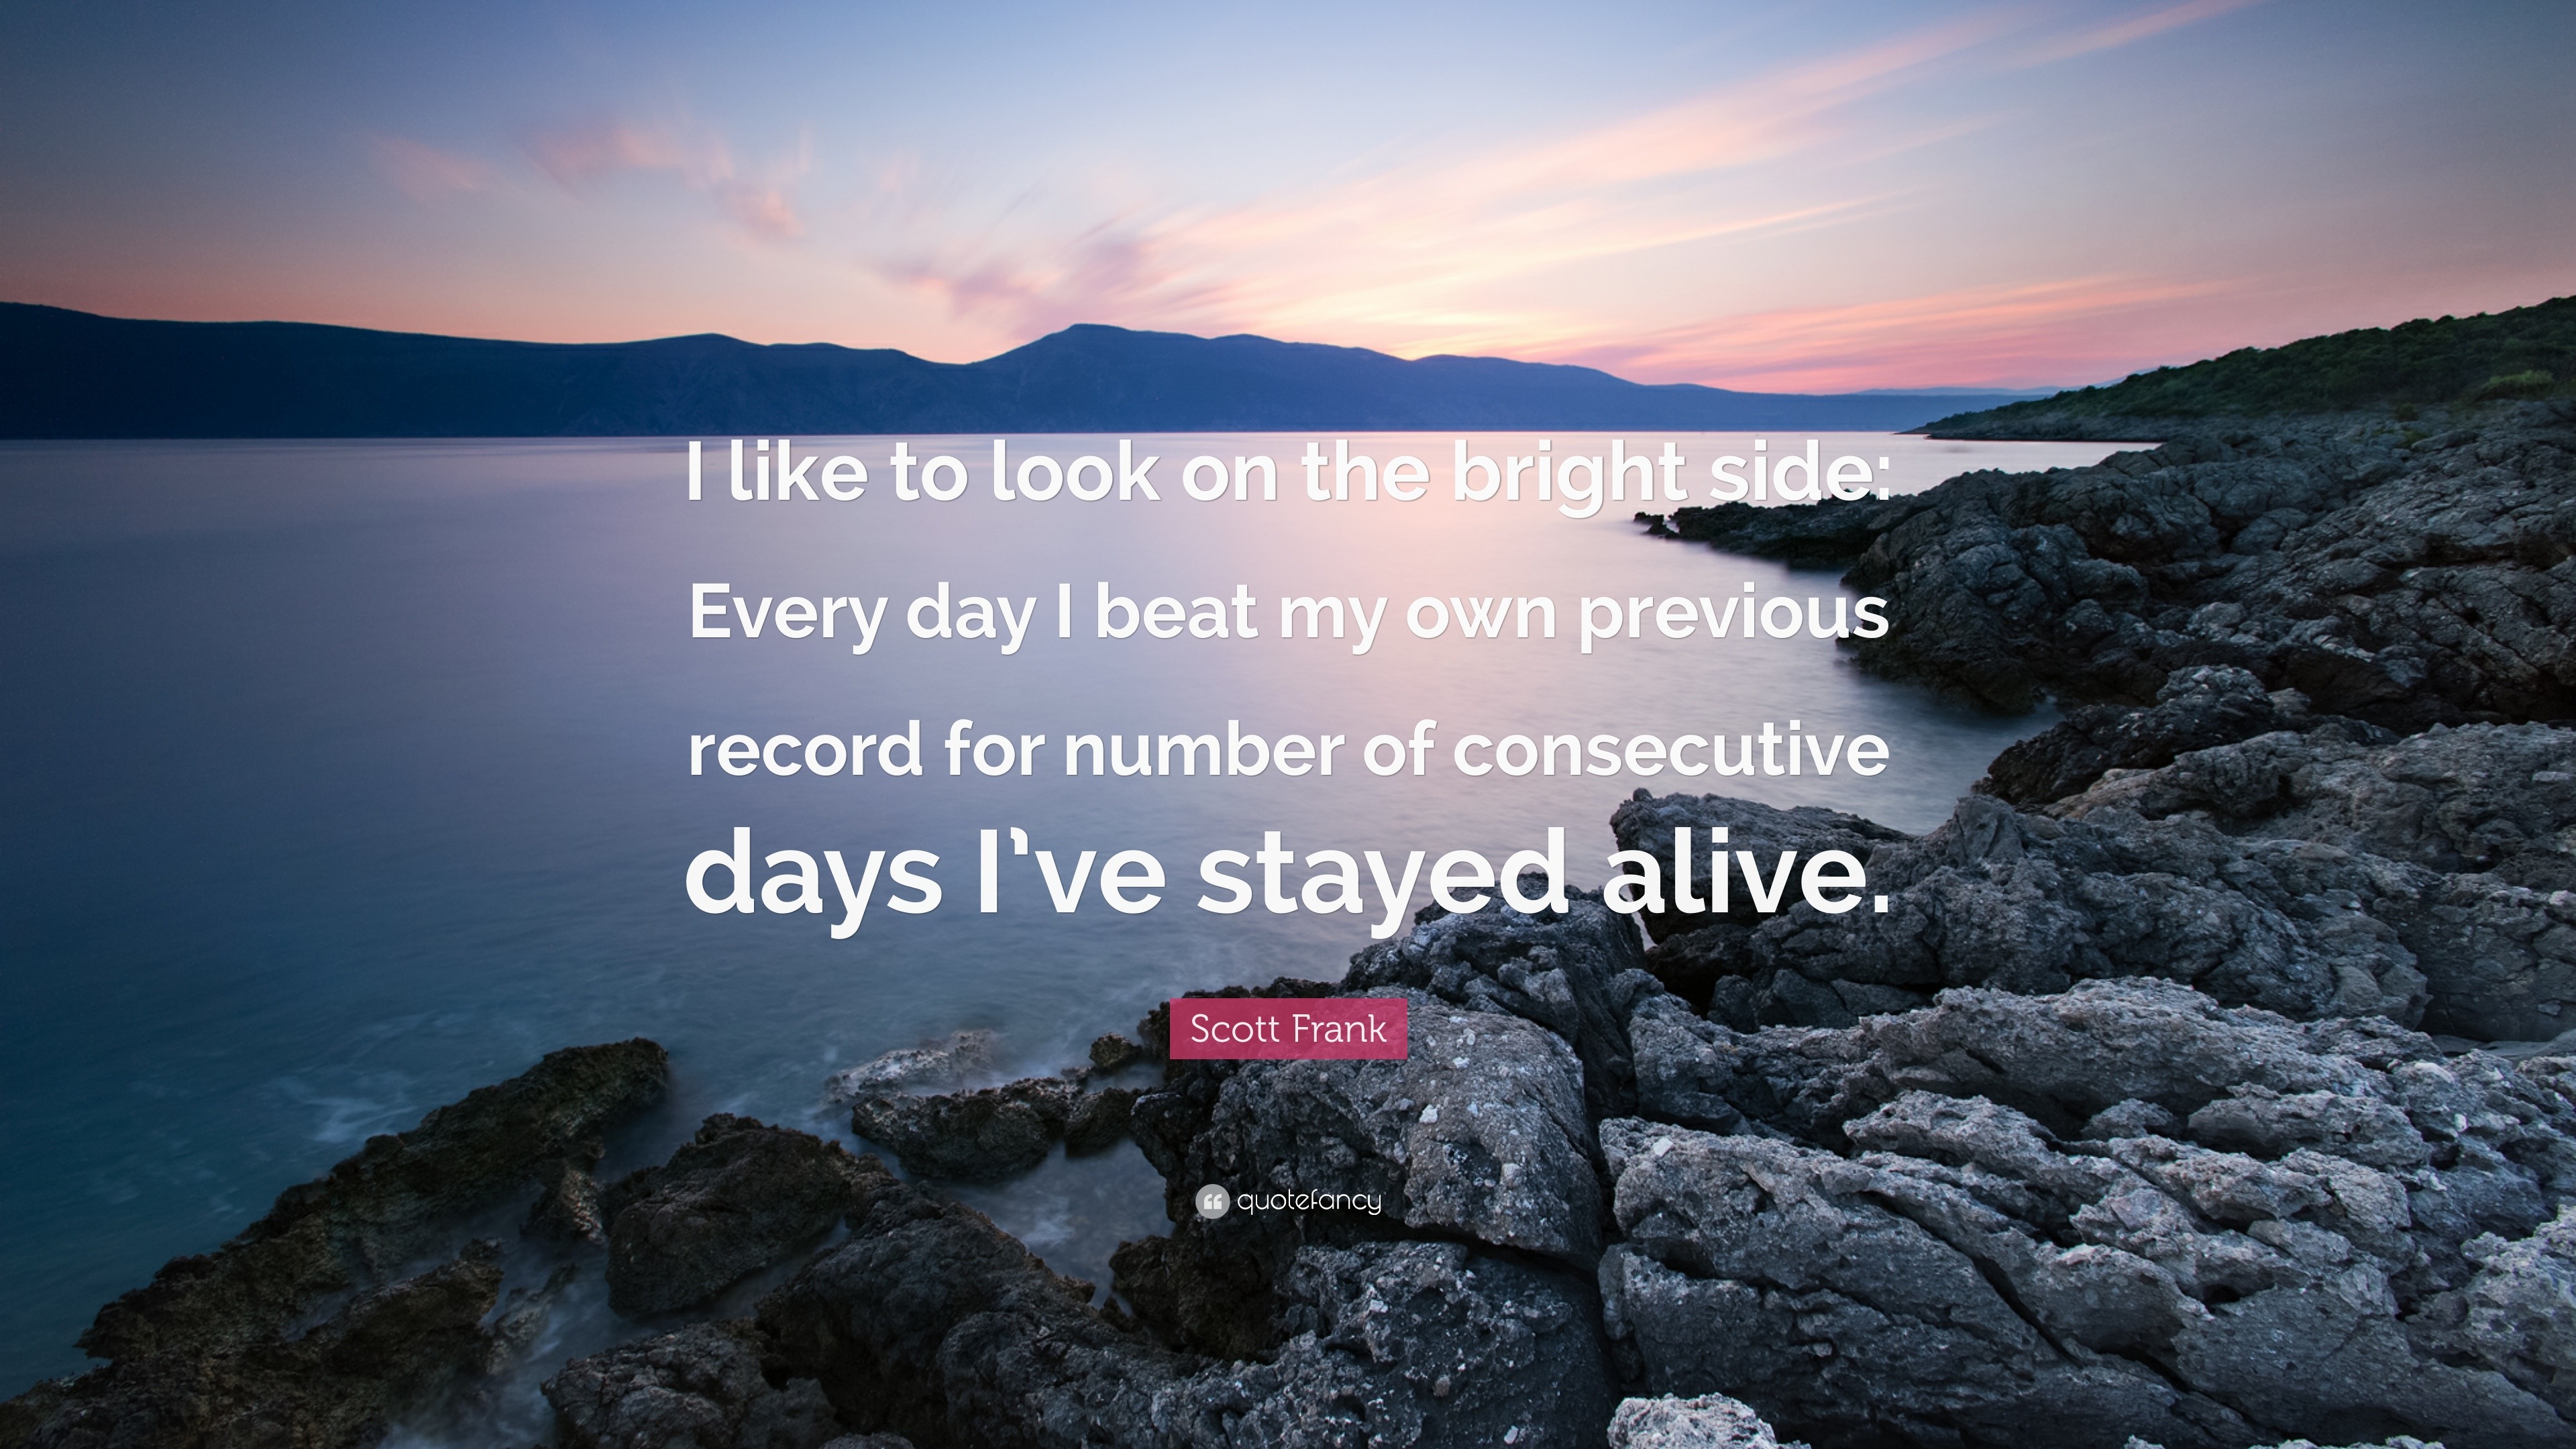 Scott Frank Quote: “I like on the bright side: day I beat my own previous for number of consecutive days I've stayed al...”